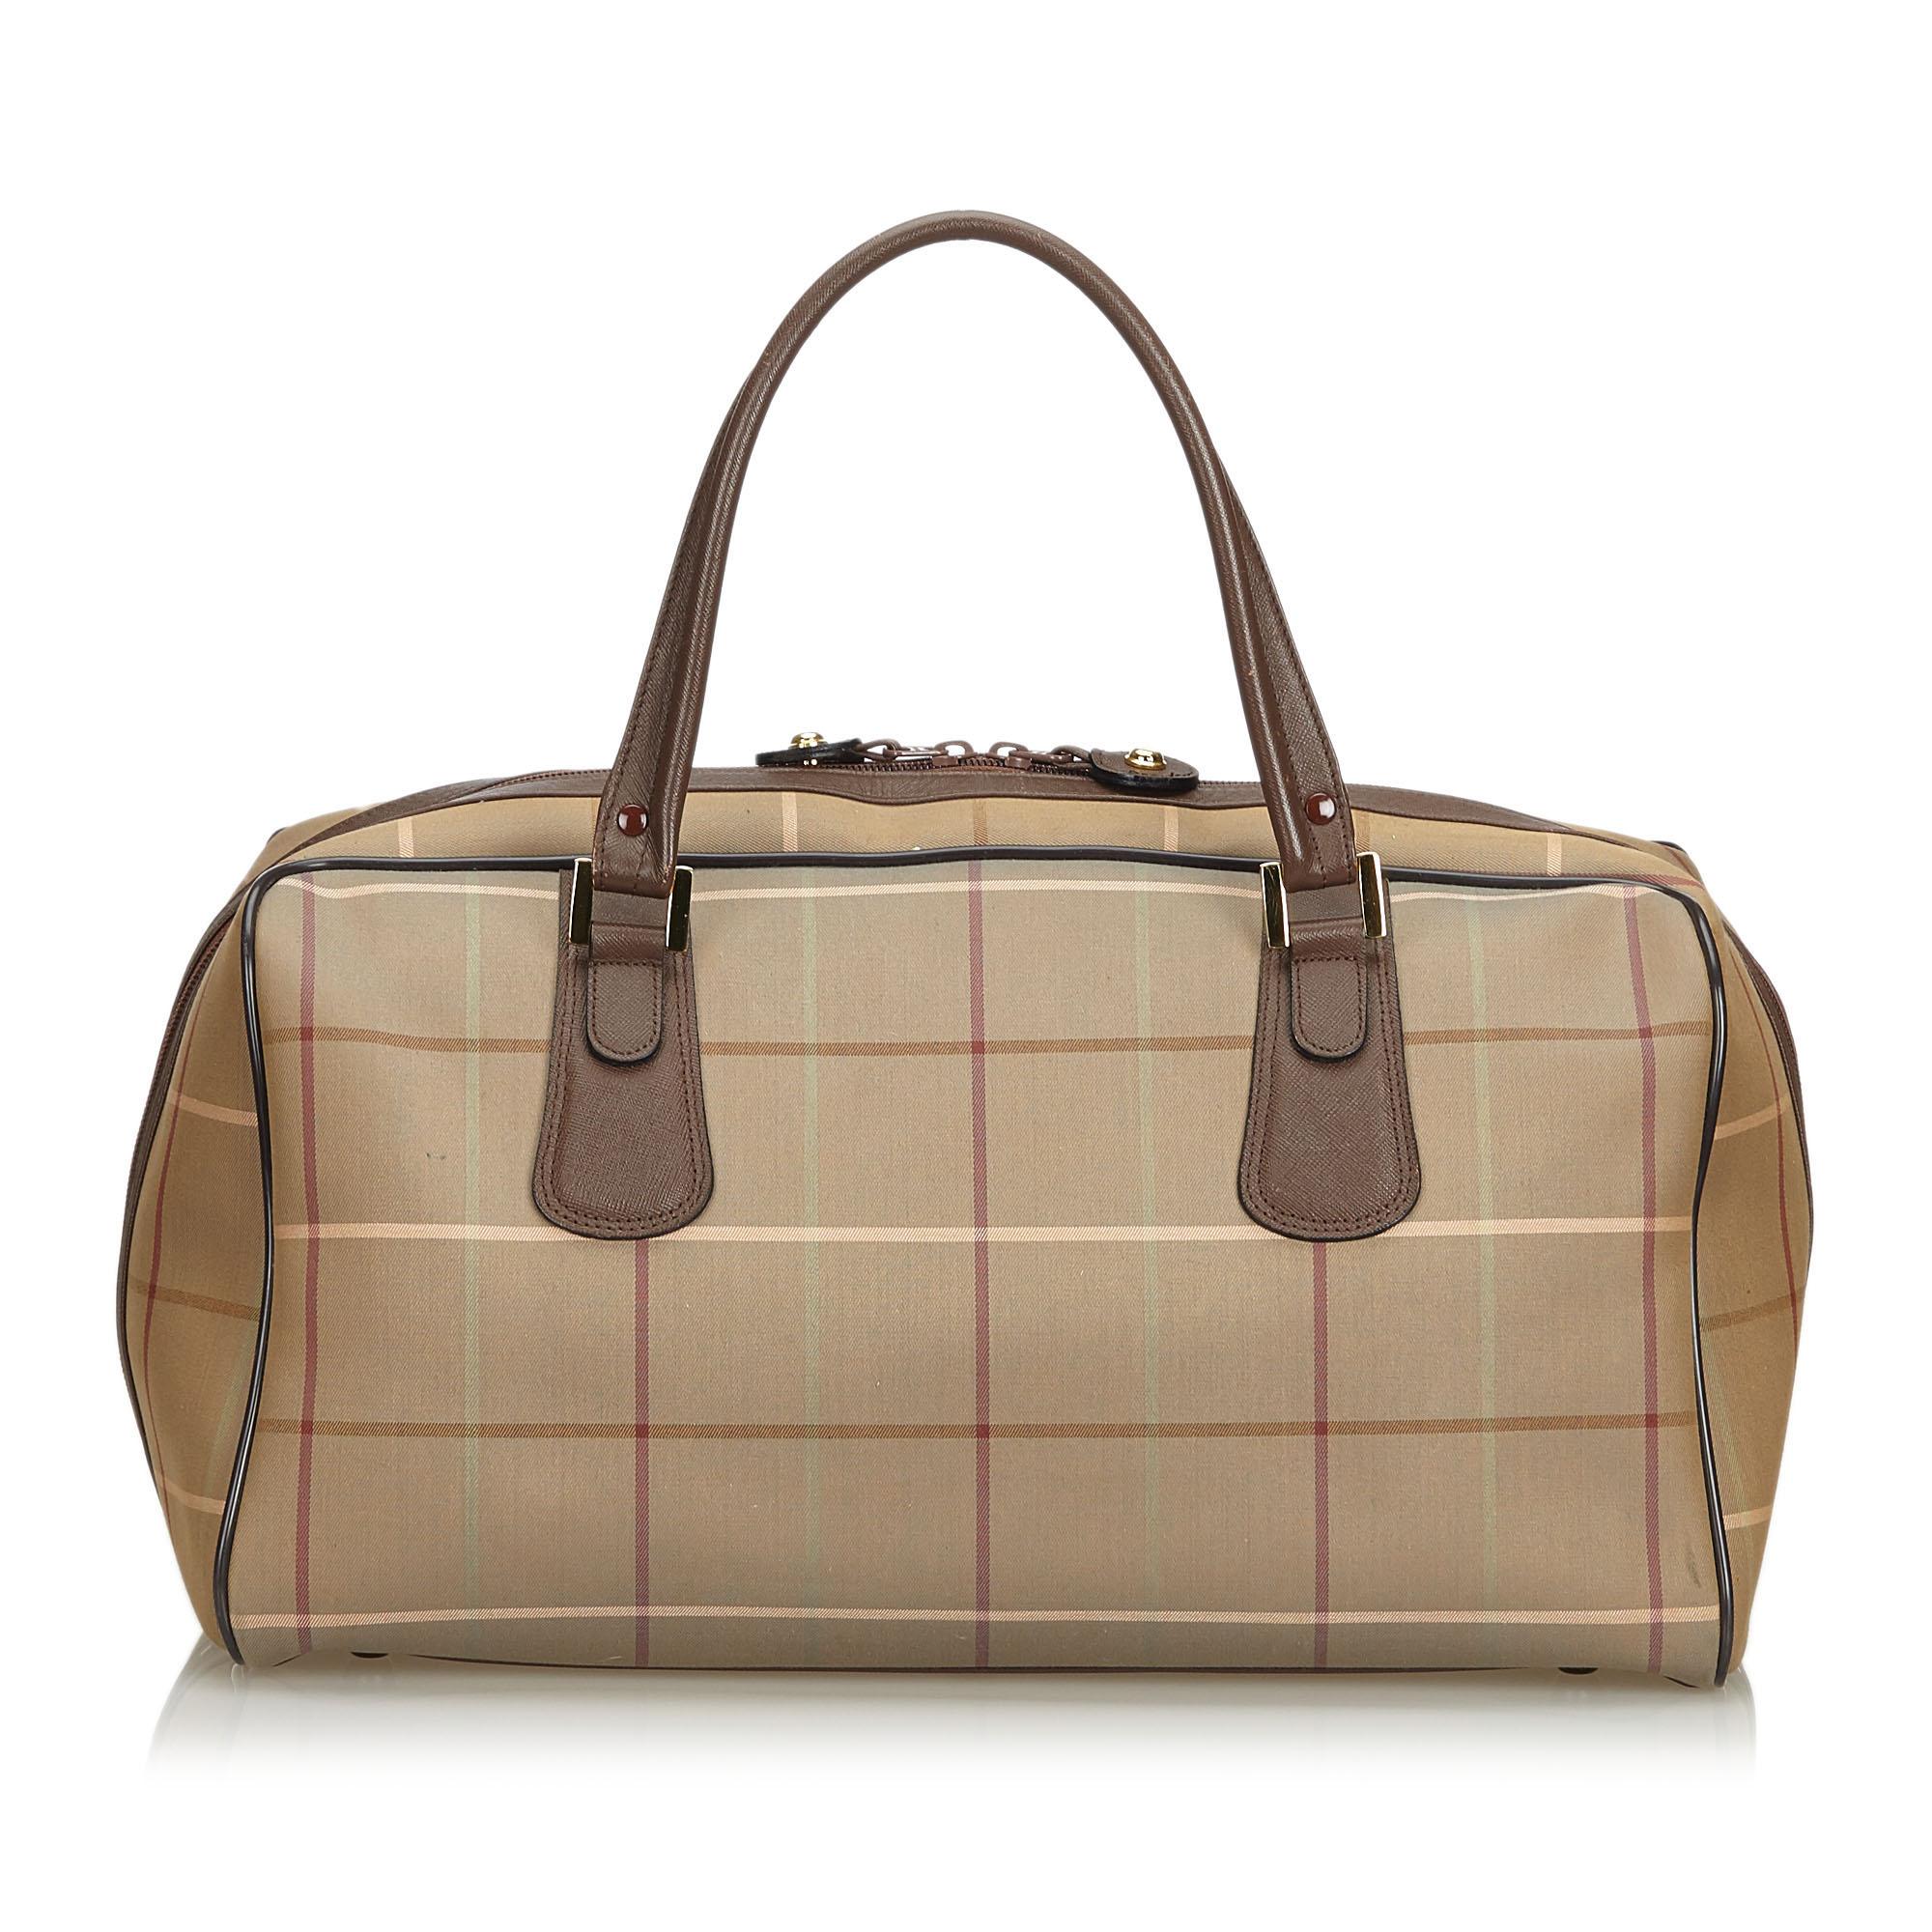  Vintage Authentic Burberry Brown Plaid Travel Bag United Kingdom LARGE In Good Condition For Sale In Orlando, FL